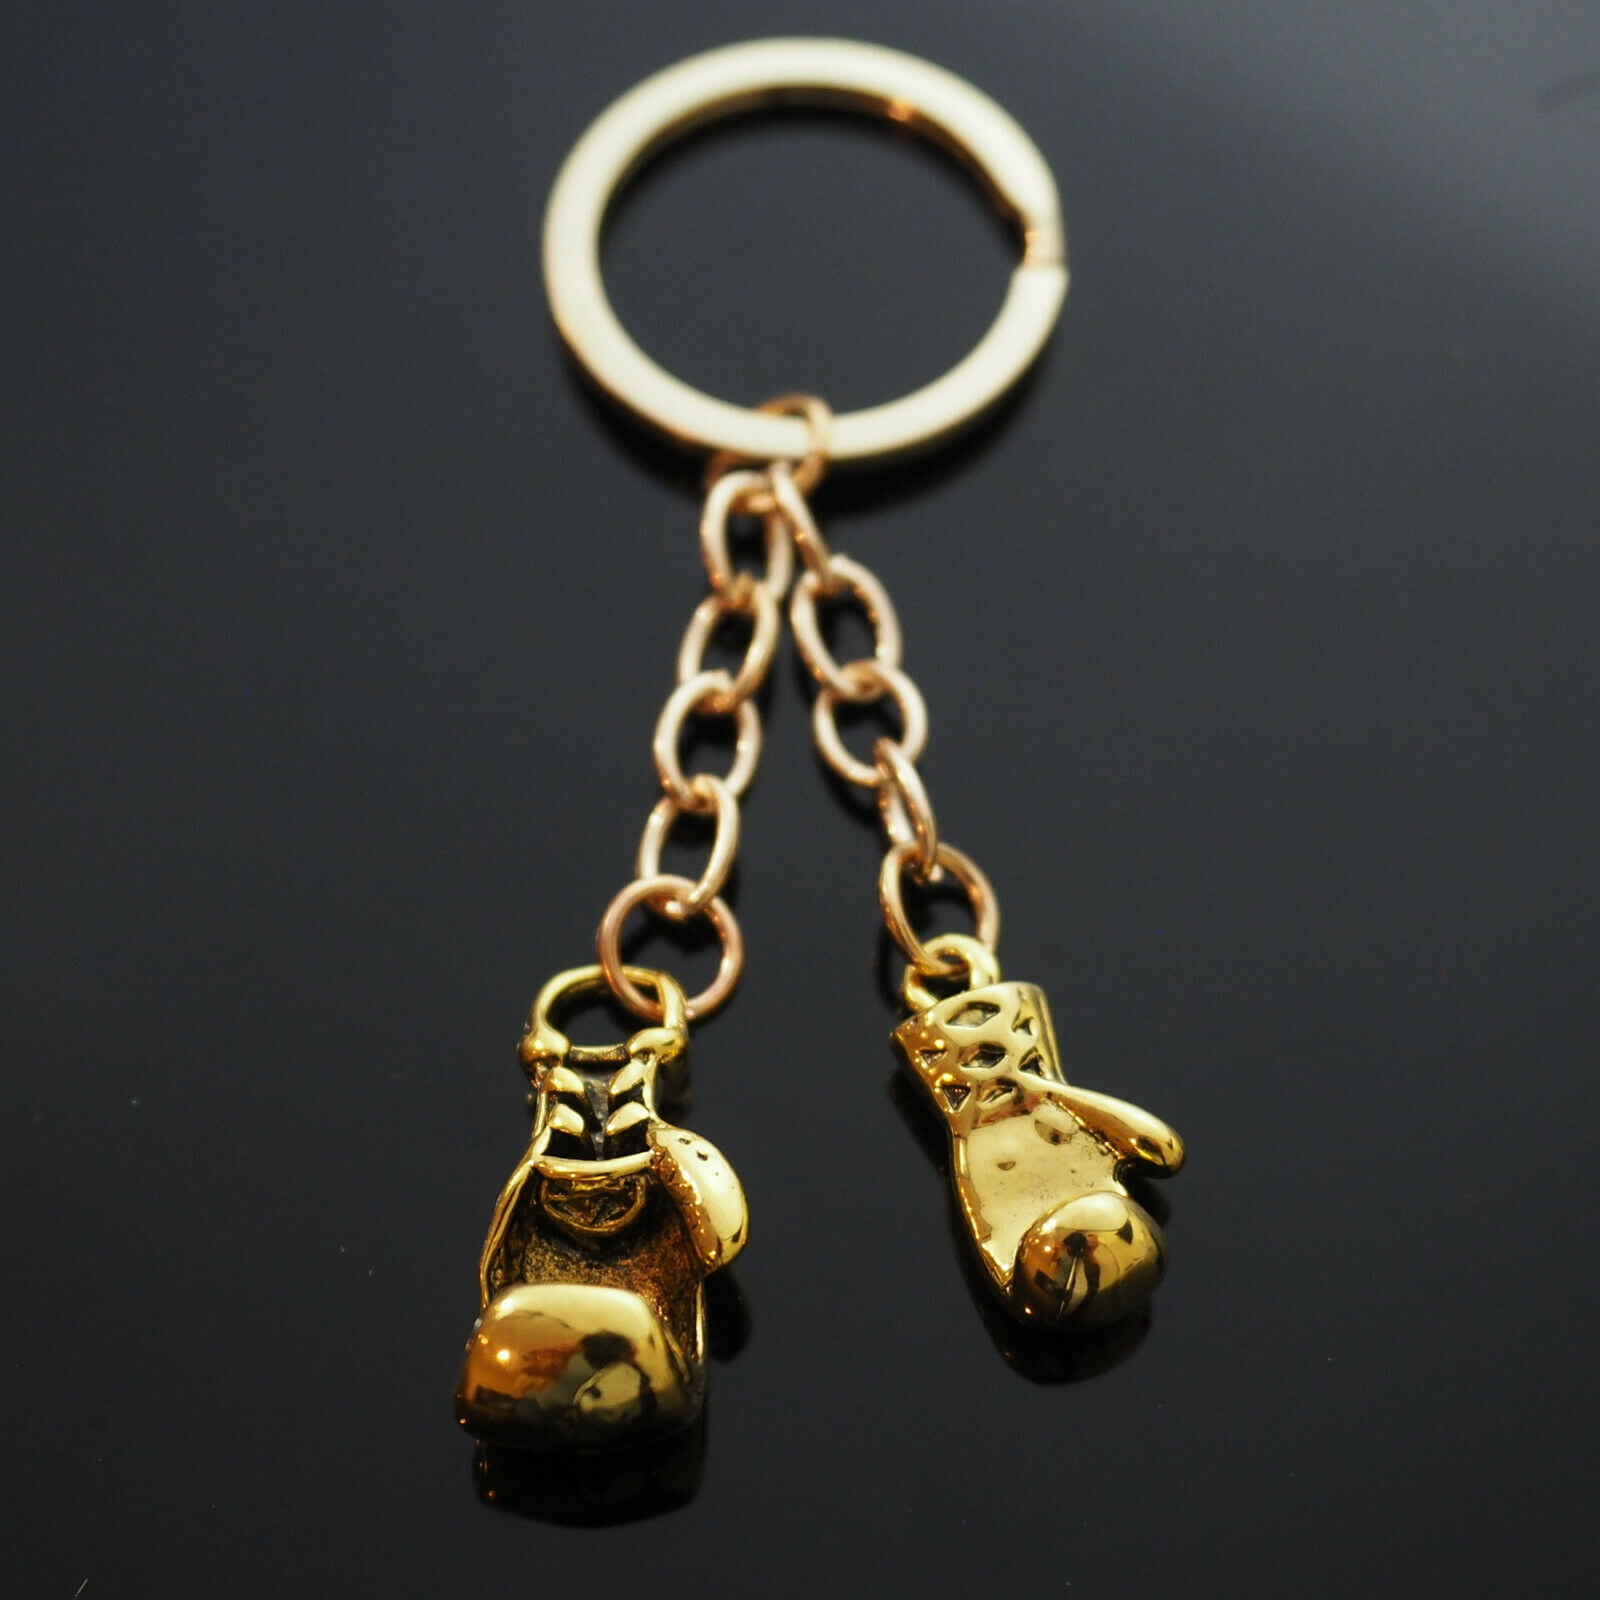 Boxing Golden Gloves Keychain Keyring Pendant Key Chain Ring Gift Gold Color 